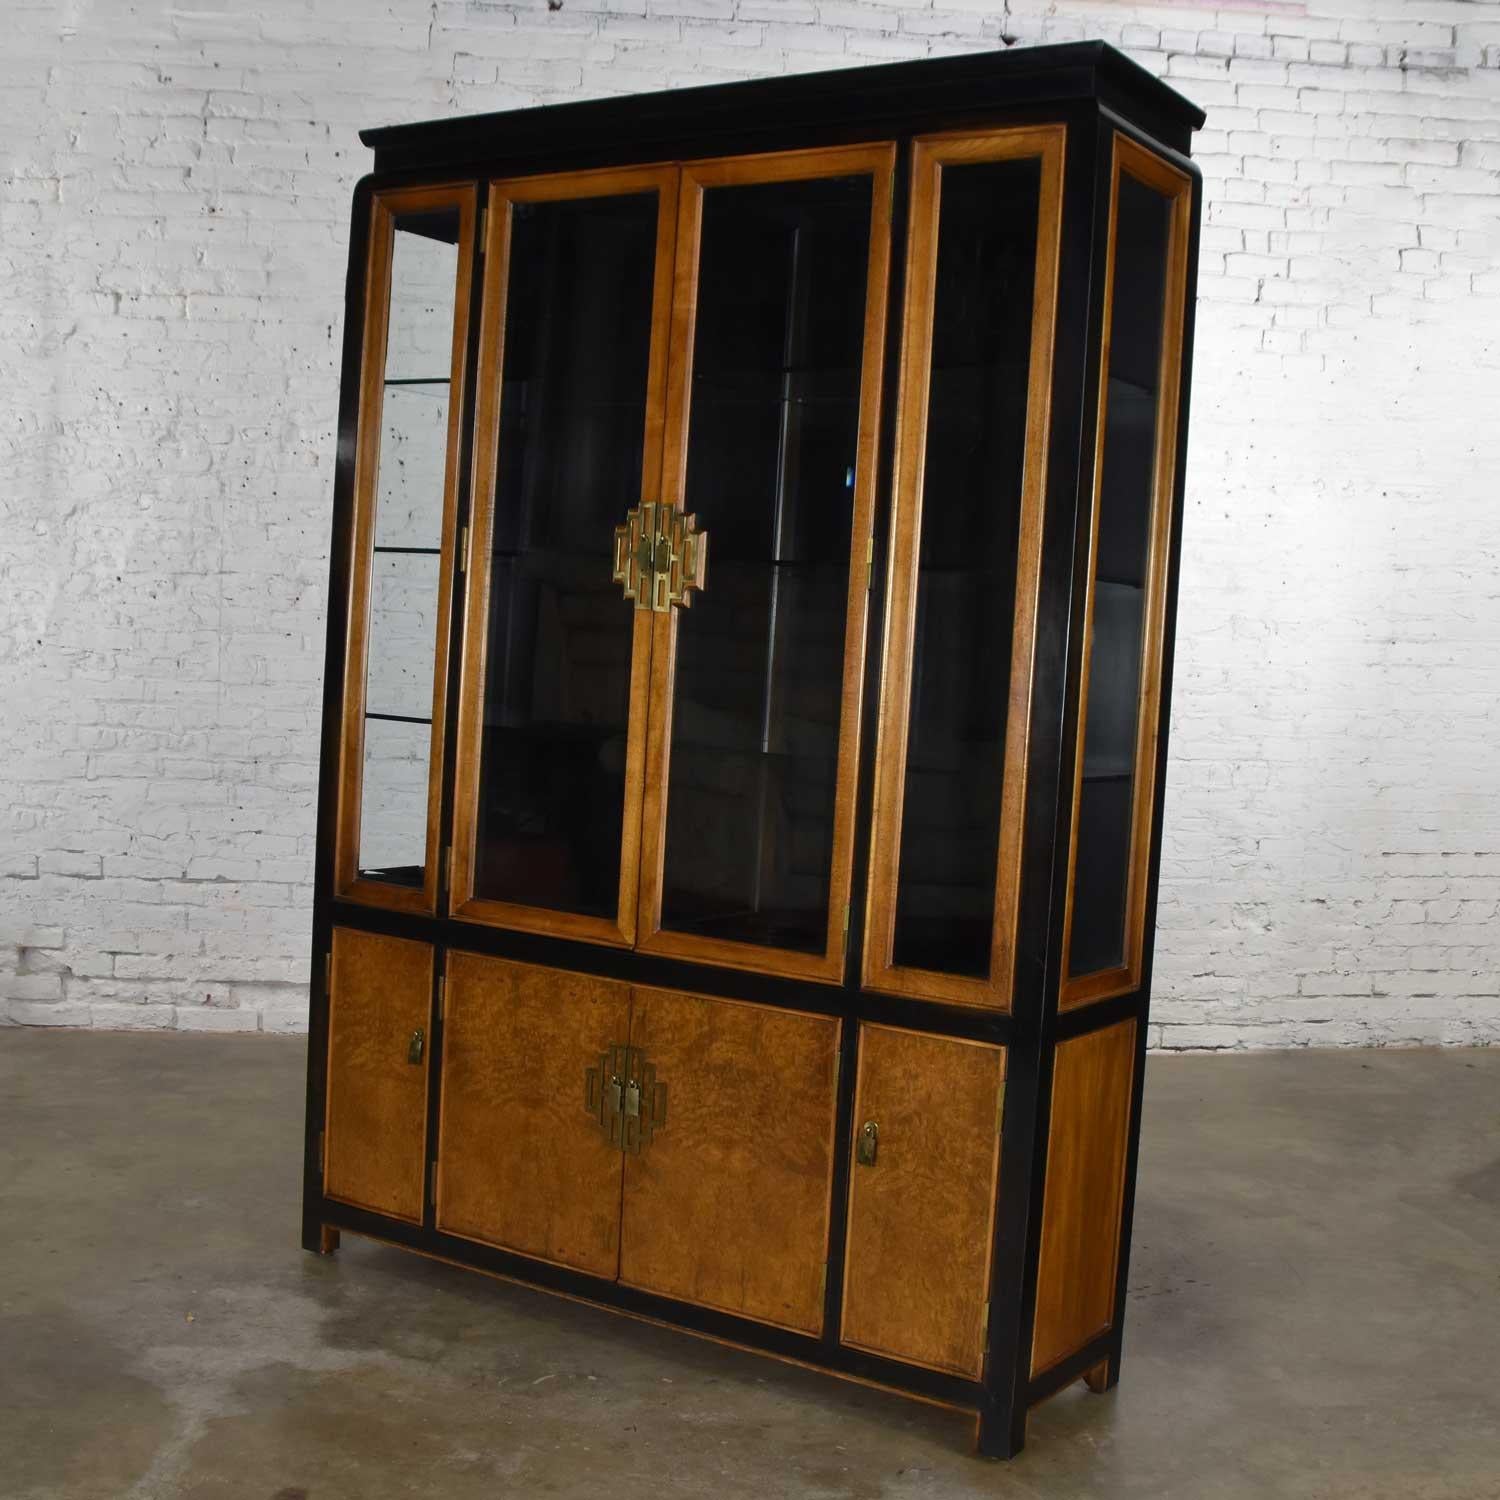 Gorgeous large Chin Hua china display cabinet or bookcase by Raymond K. Sobota for Century Furniture comprised of white ash burlwood with ebonized maple accents, brass hardware, glass shelves and lights. Wonderful vintage condition, a small repair